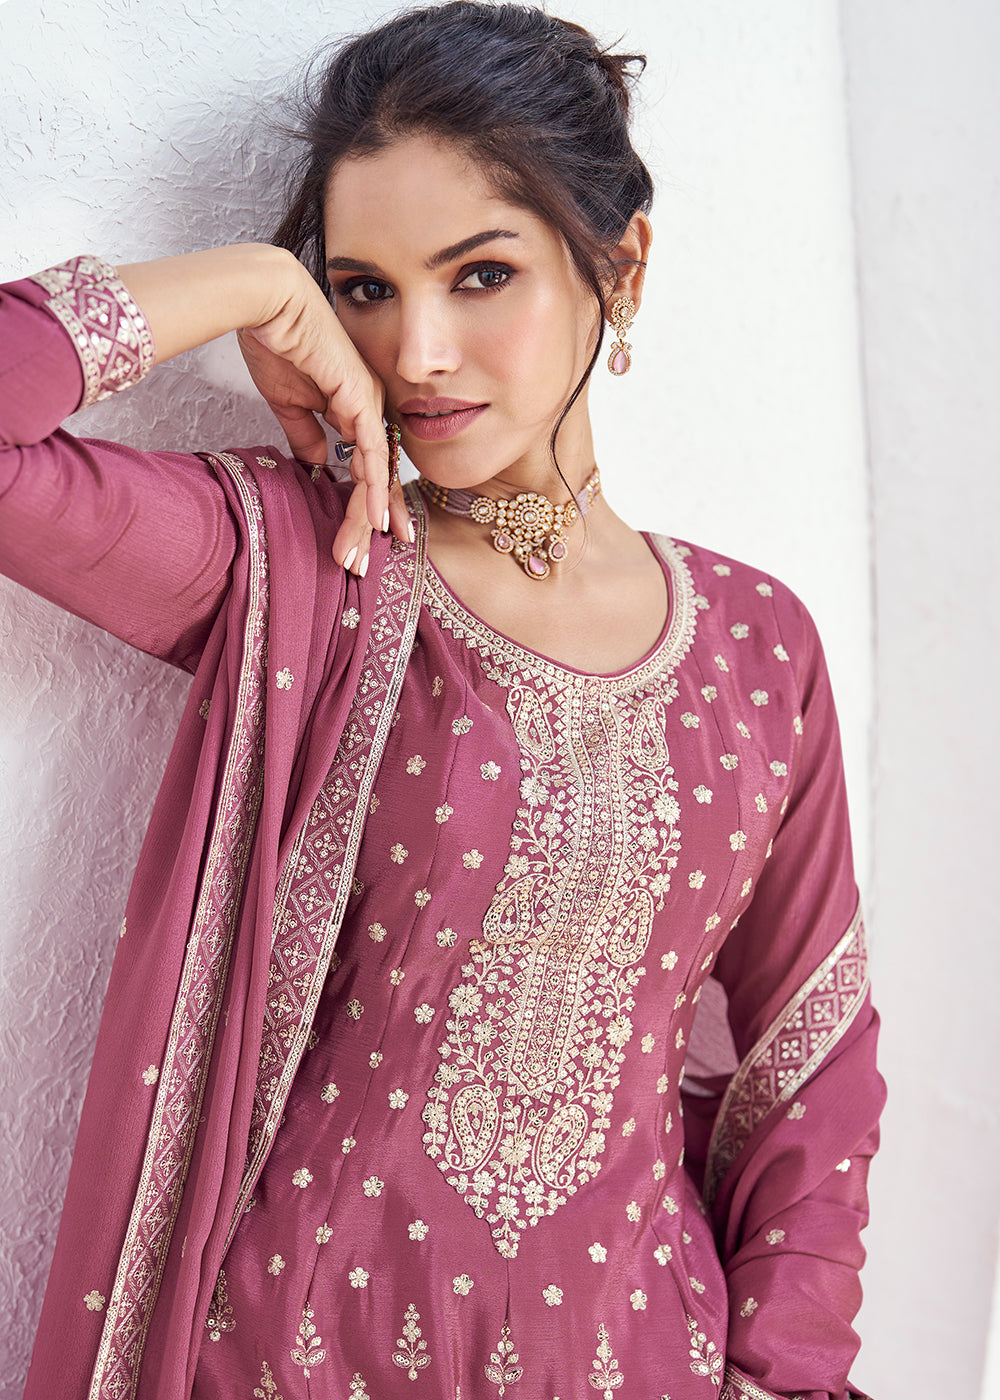 Buy Now Incredible Pink Embroidered Chinnon Festive Palazzo Suit Online in USA, UK, Canada, Germany, Australia & Worldwide at Empress Clothing.